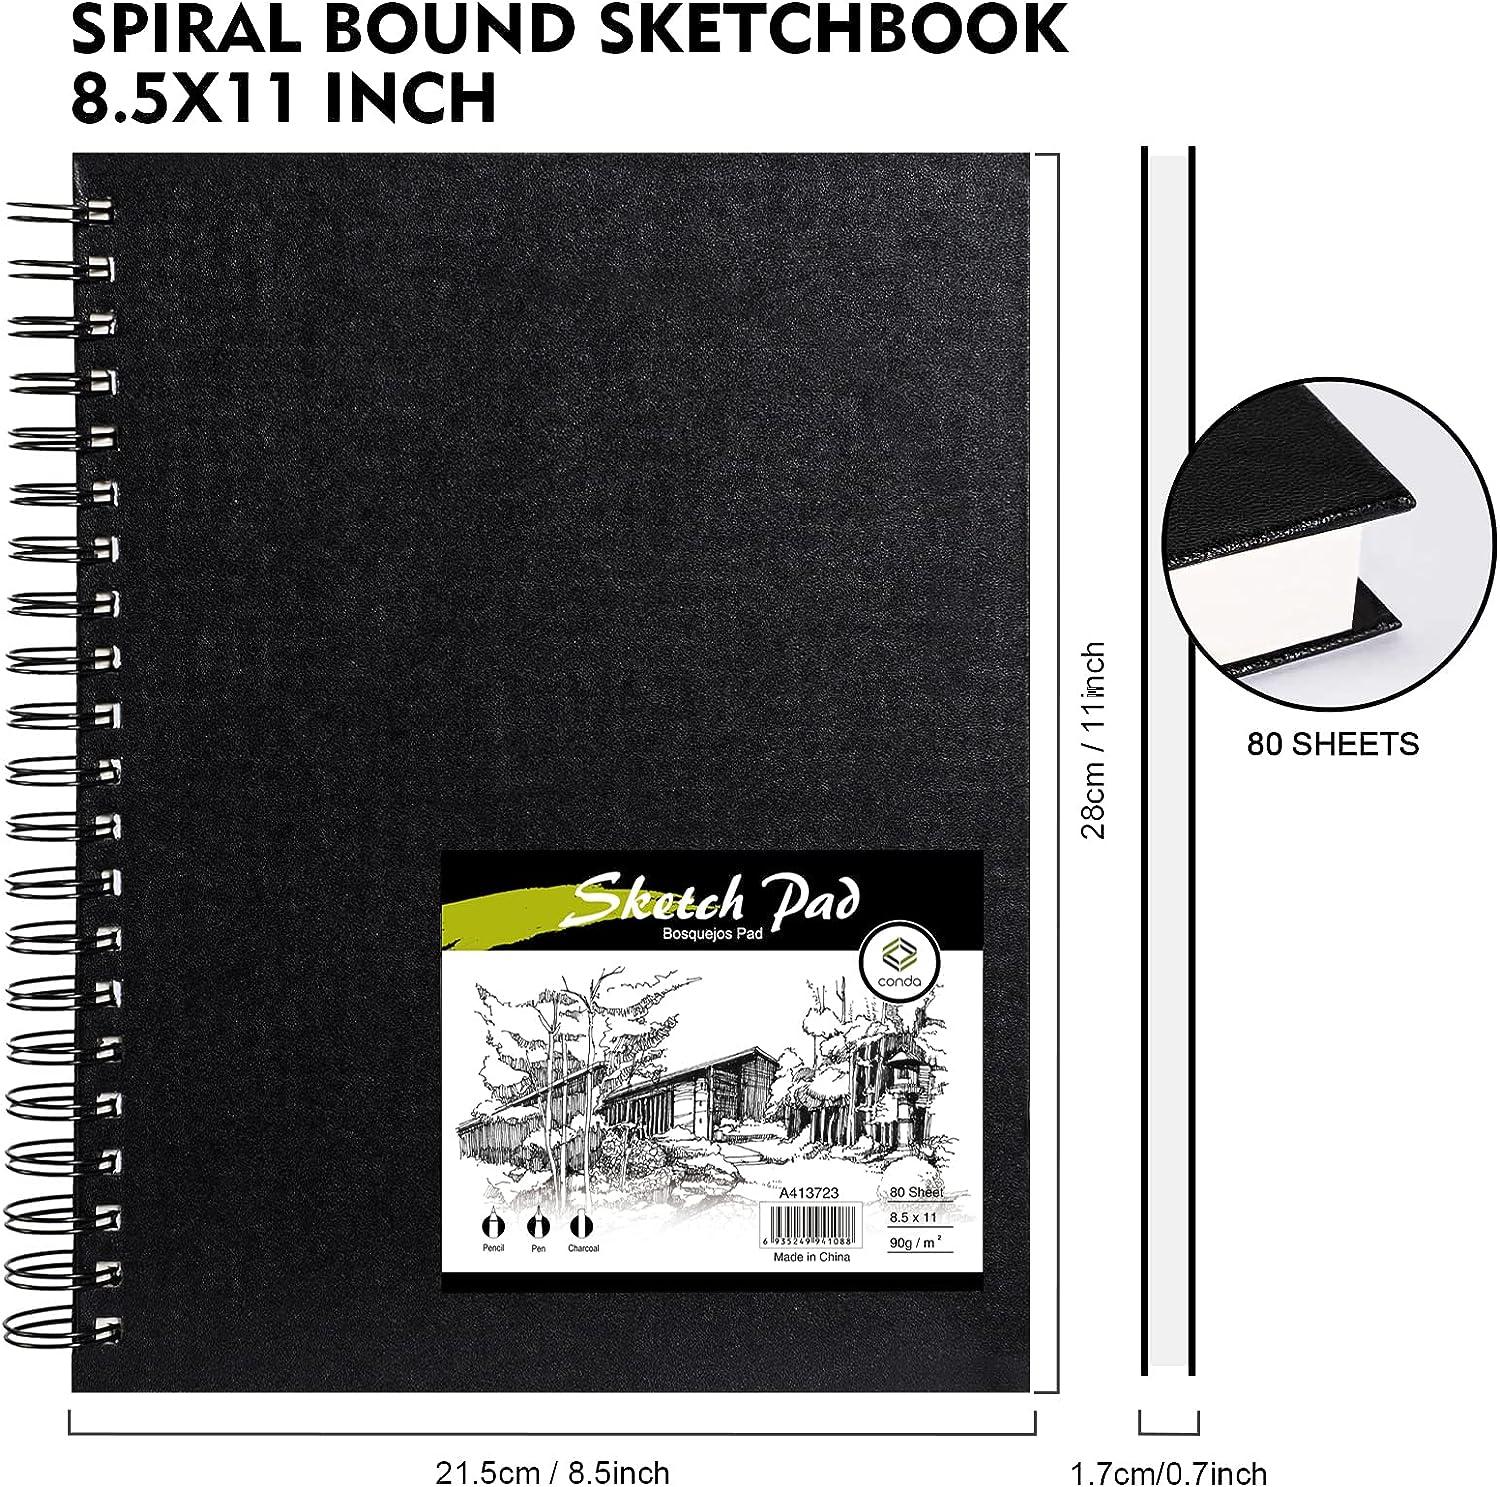 conda 8.5x11 Hardbound Sketch Book, Double-Sided Hardcover Sketchbook,  Spiral Sketch Pad, Durable Acid Free Drawing Art Paper for Kids & Adults